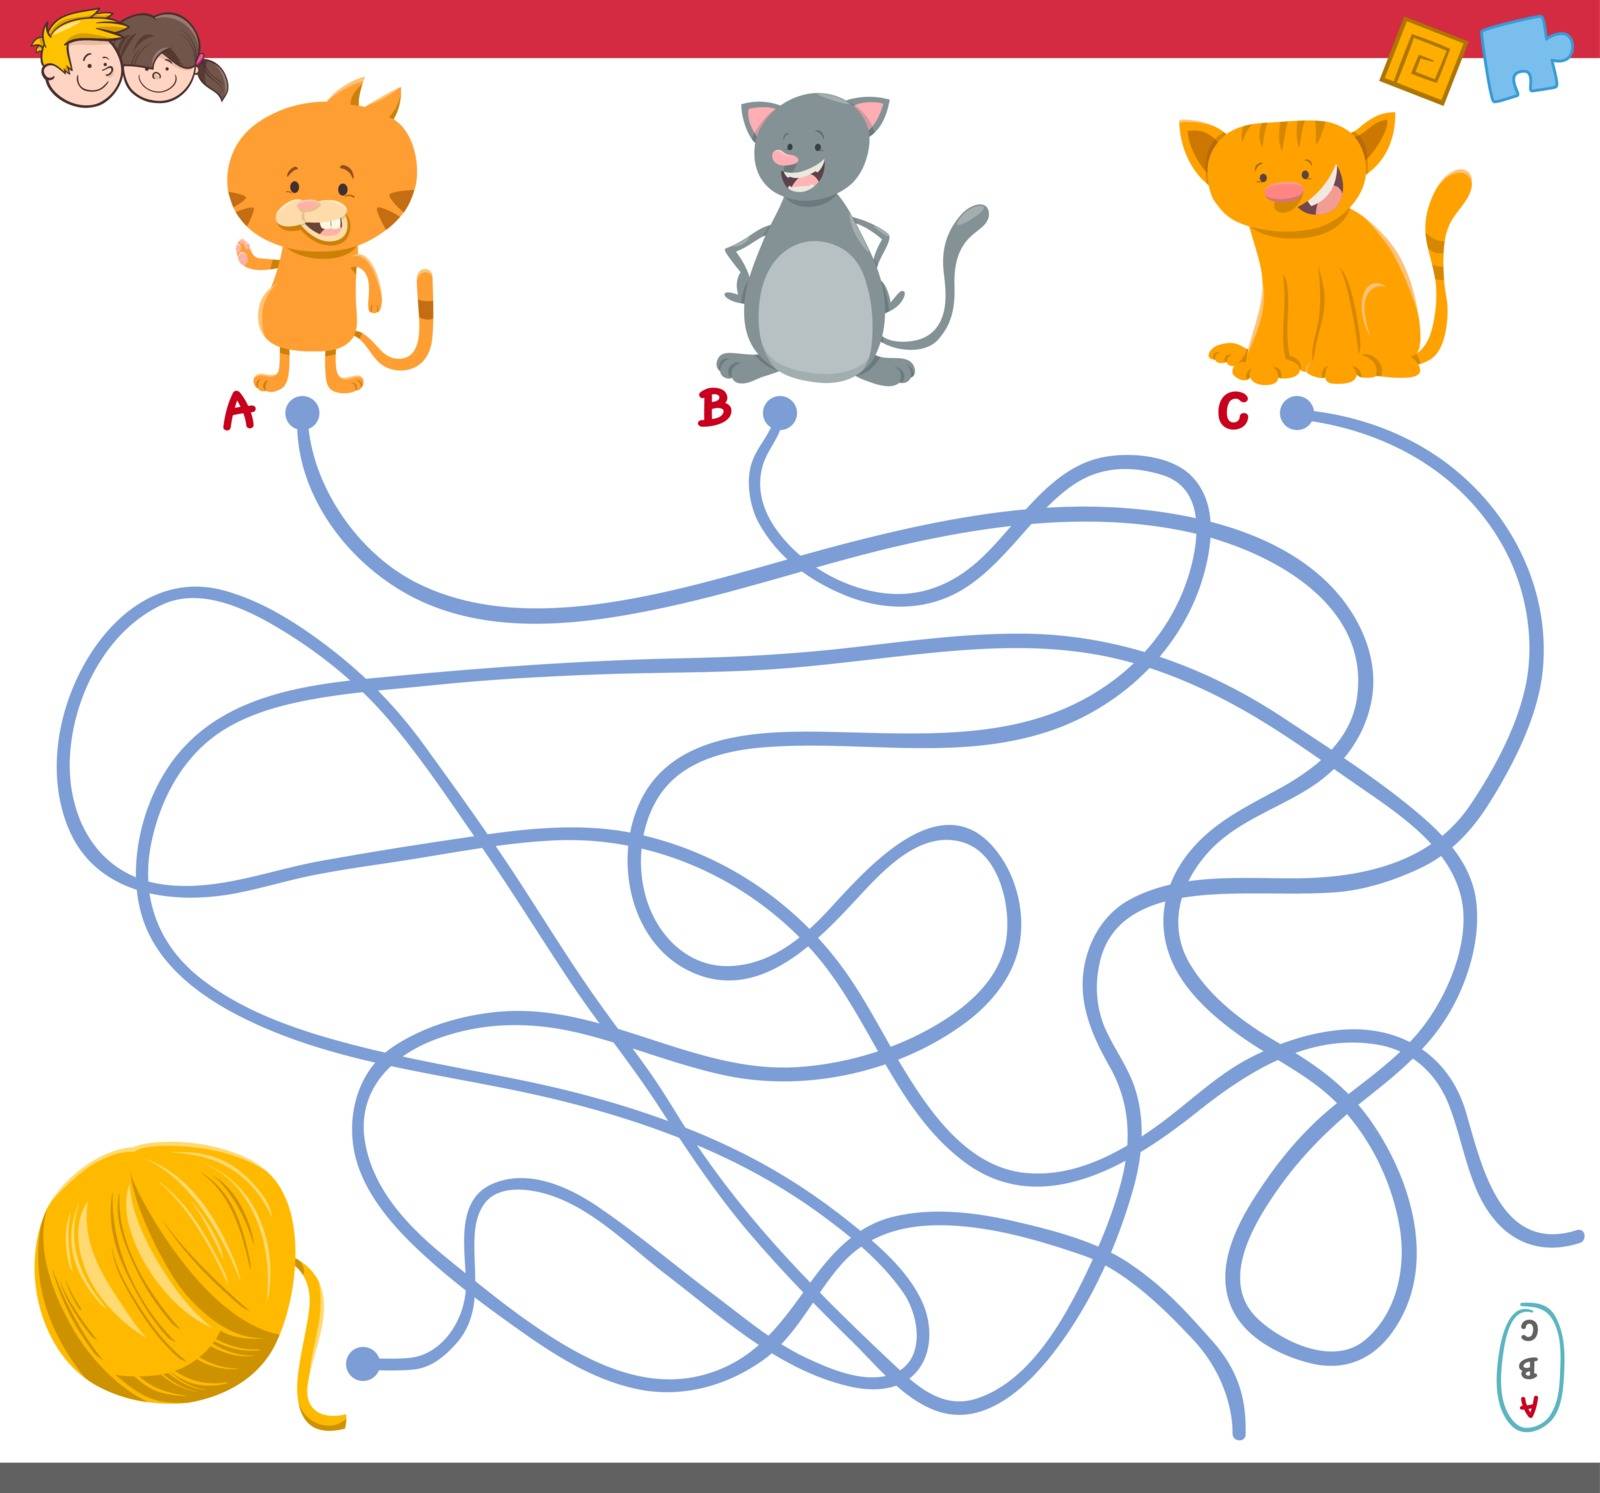 Cartoon Illustration of Paths or Maze Puzzle Activity Game with Kitten Characters and Wool Ball